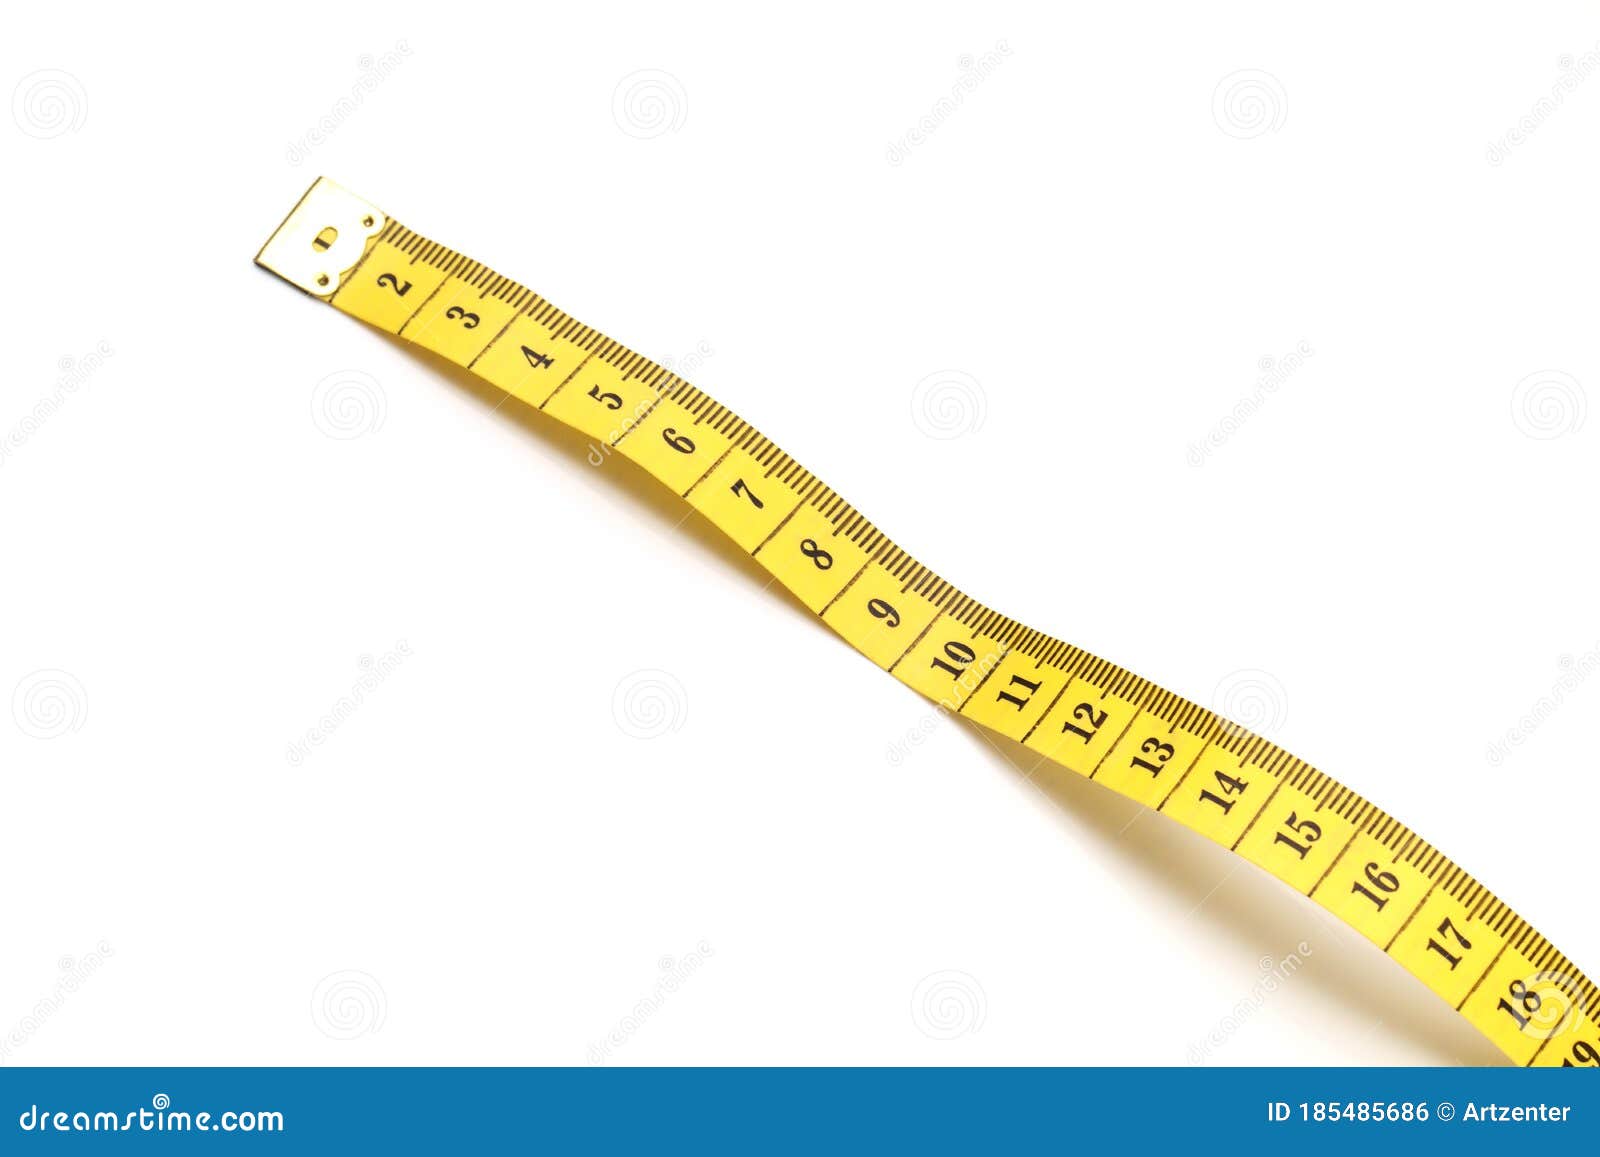 https://thumbs.dreamstime.com/z/yellow-tailor-measuring-tape-white-background-numbers-shown-represent-centimeters-soft-measuring-tape-sewing-tailor-tool-yellow-185485686.jpg